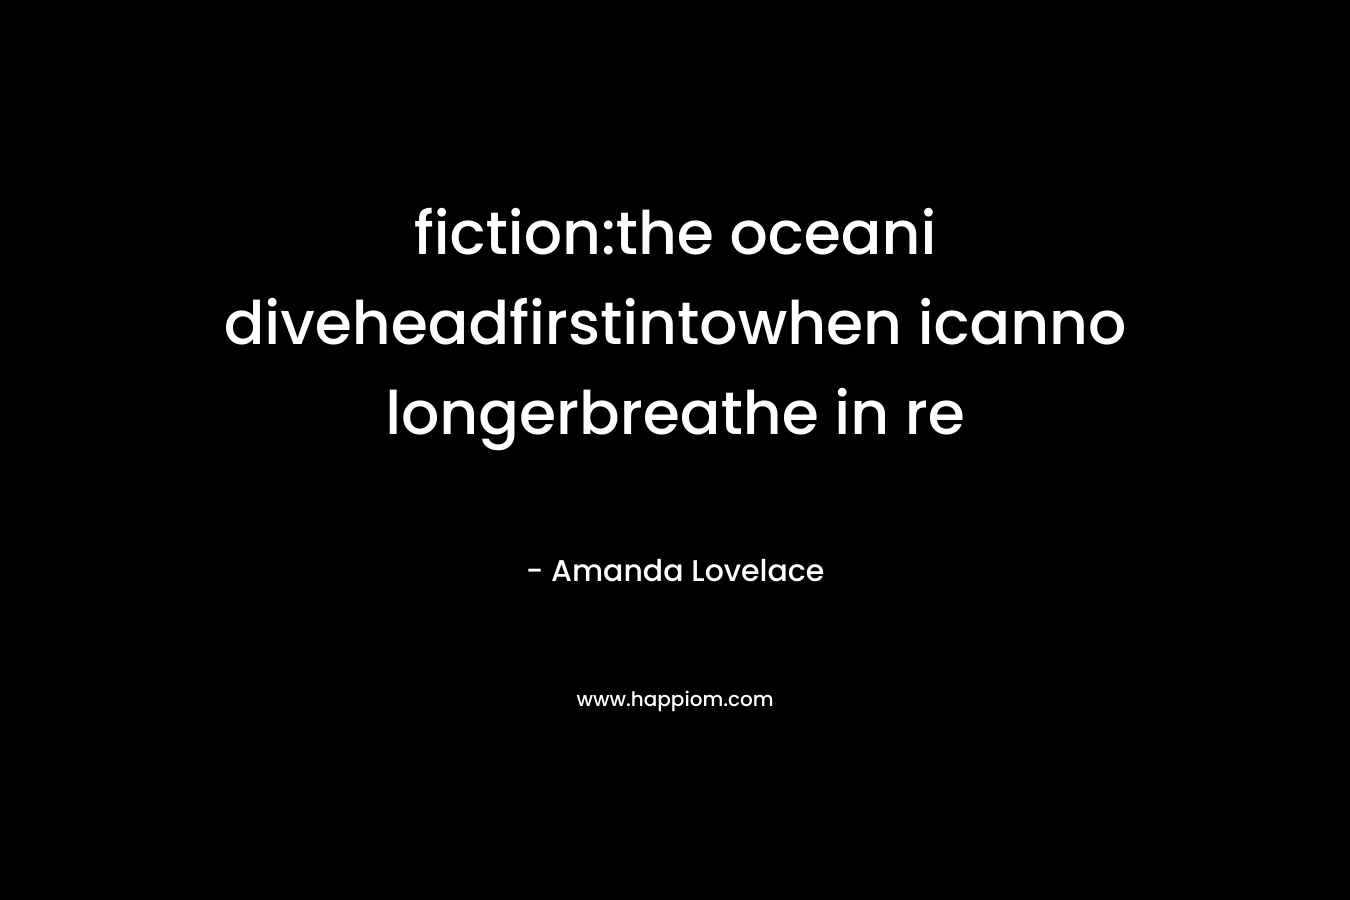 fiction:the oceani diveheadfirstintowhen icanno longerbreathe in re